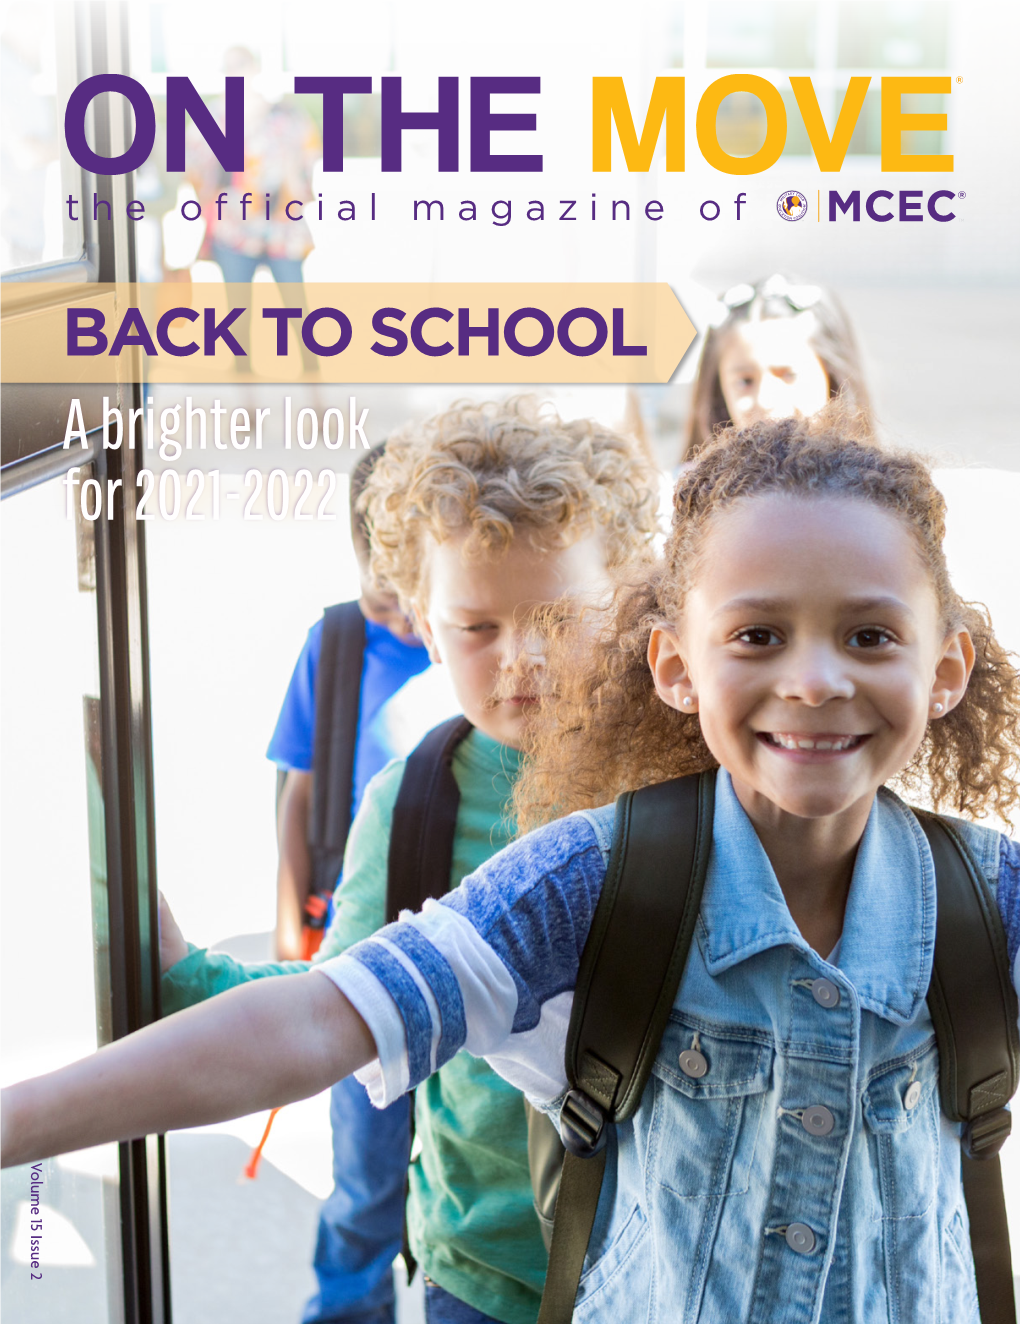 A Brighter Look for 2021-2022 Volume 15 Issue 2 Military Child Education Coalition® 01